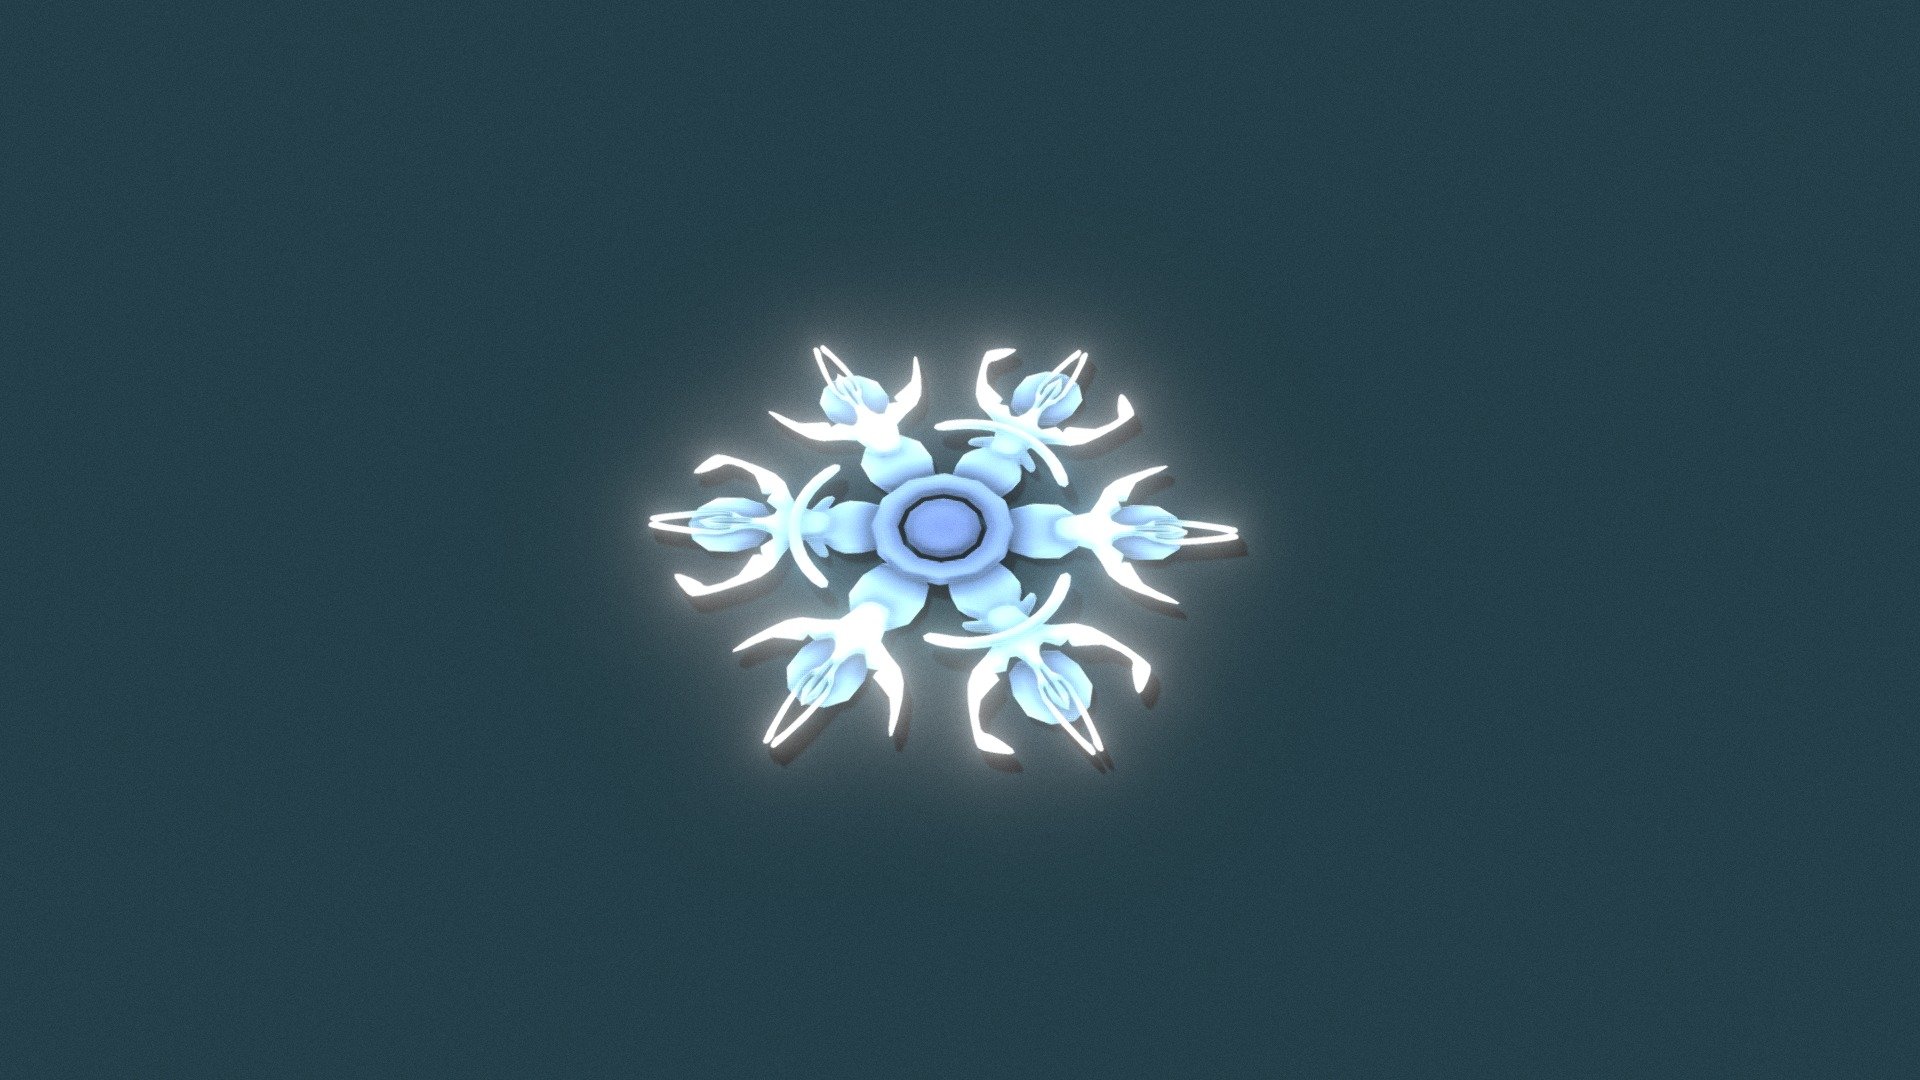 Snowflake - 3D model by nonlly [19196a6] - Sketchfab